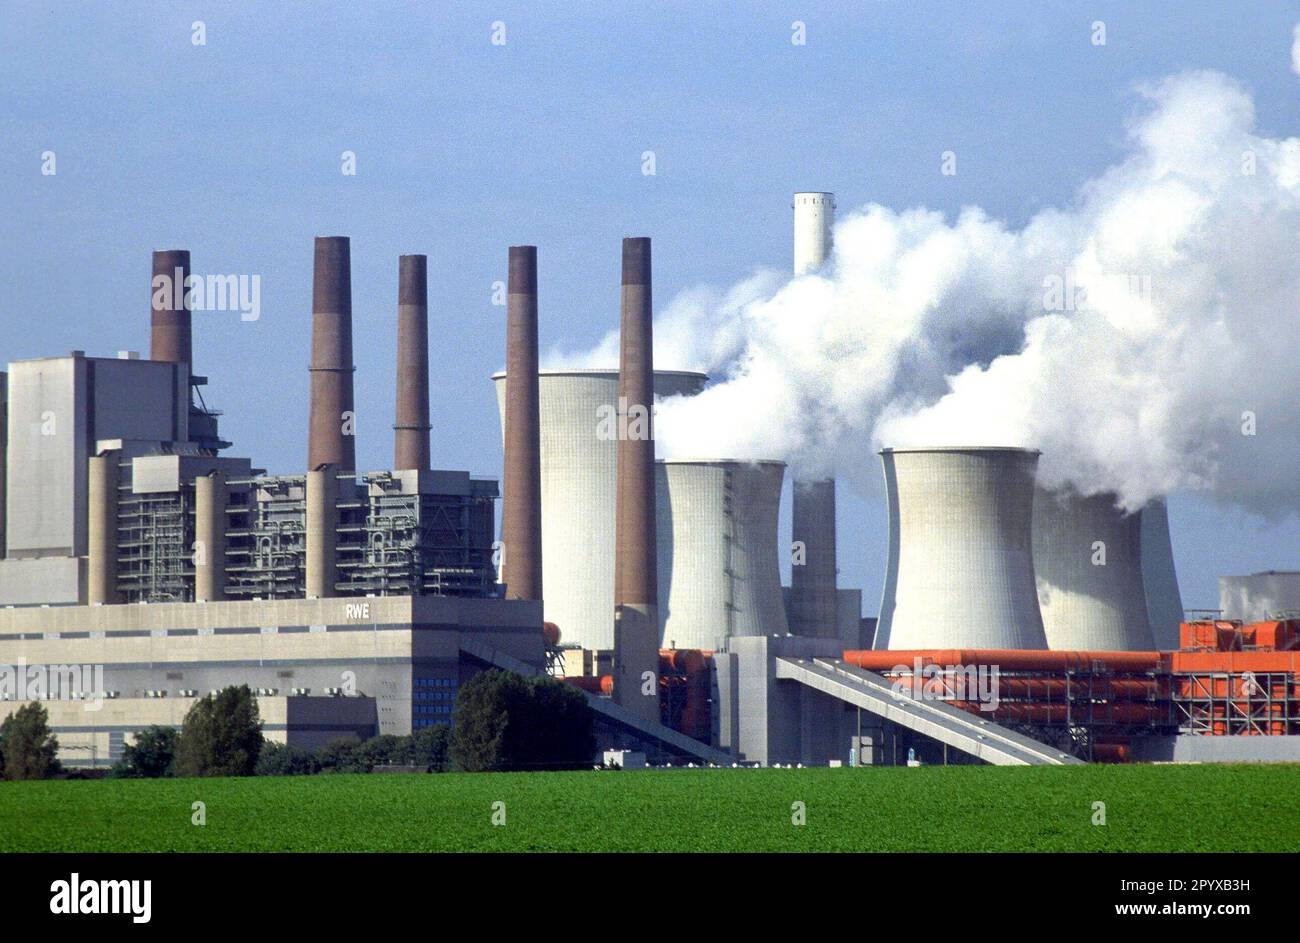 Photo date: 15.05.1995 The lignite-fired power plant Neurath of RWE. [automated translation] Stock Photo